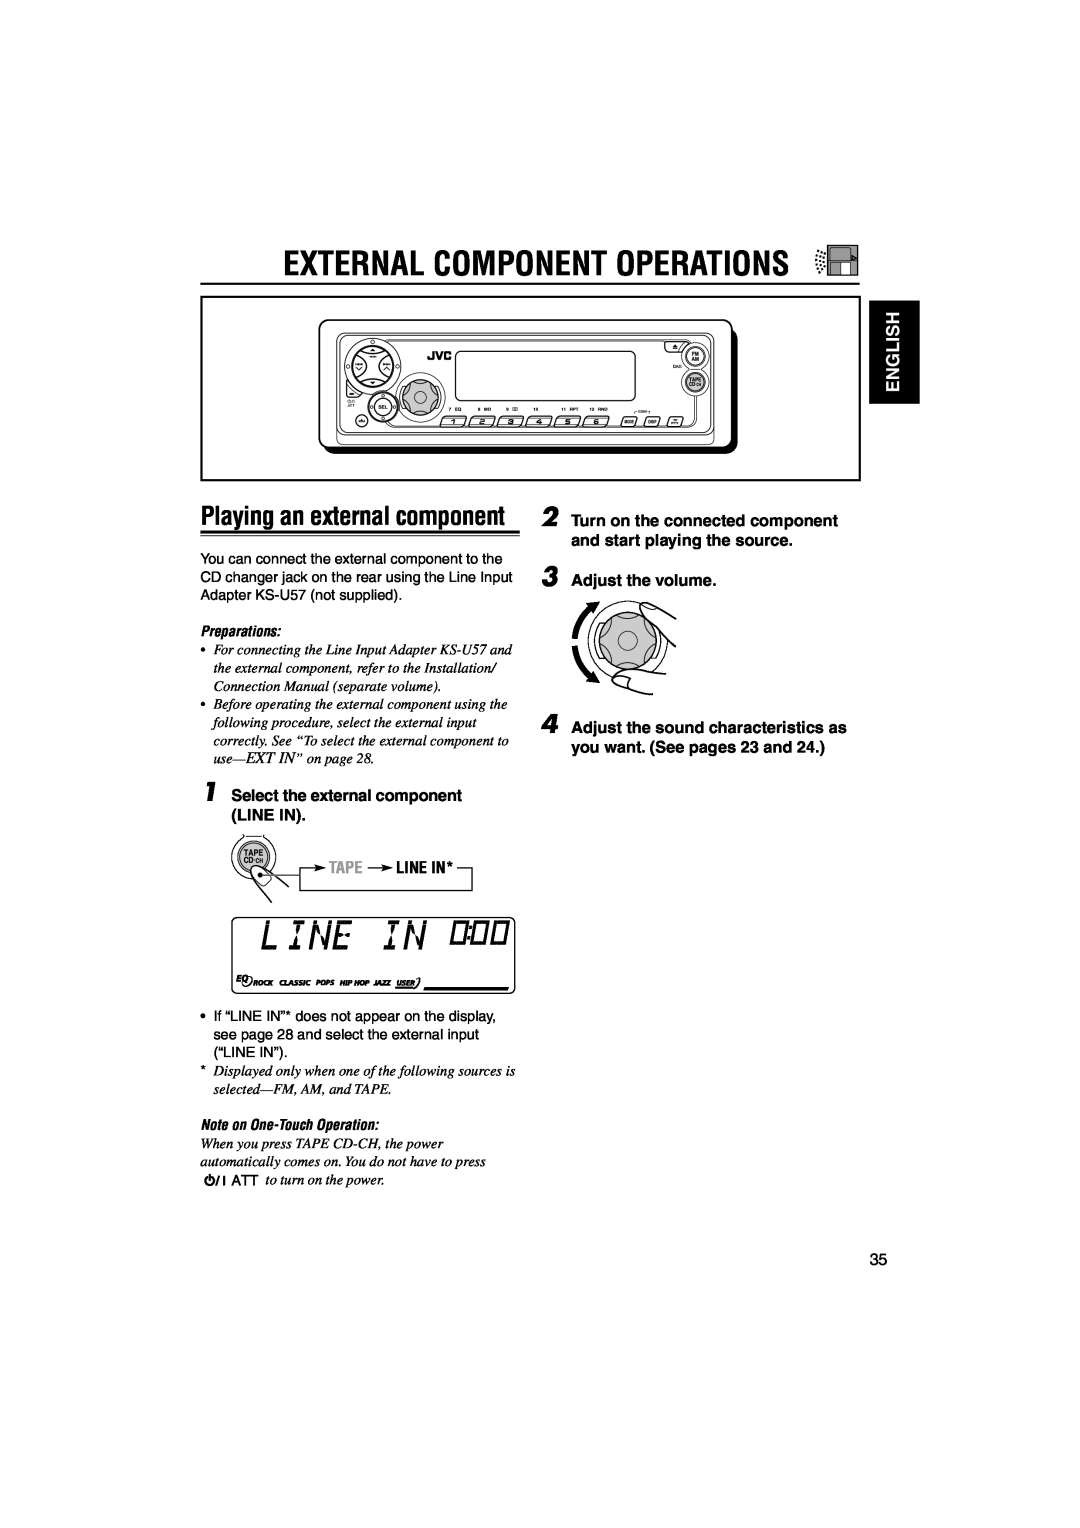 JVC KS-FX942R External Component Operations, Playing an external component, English, Select the external component LINE IN 